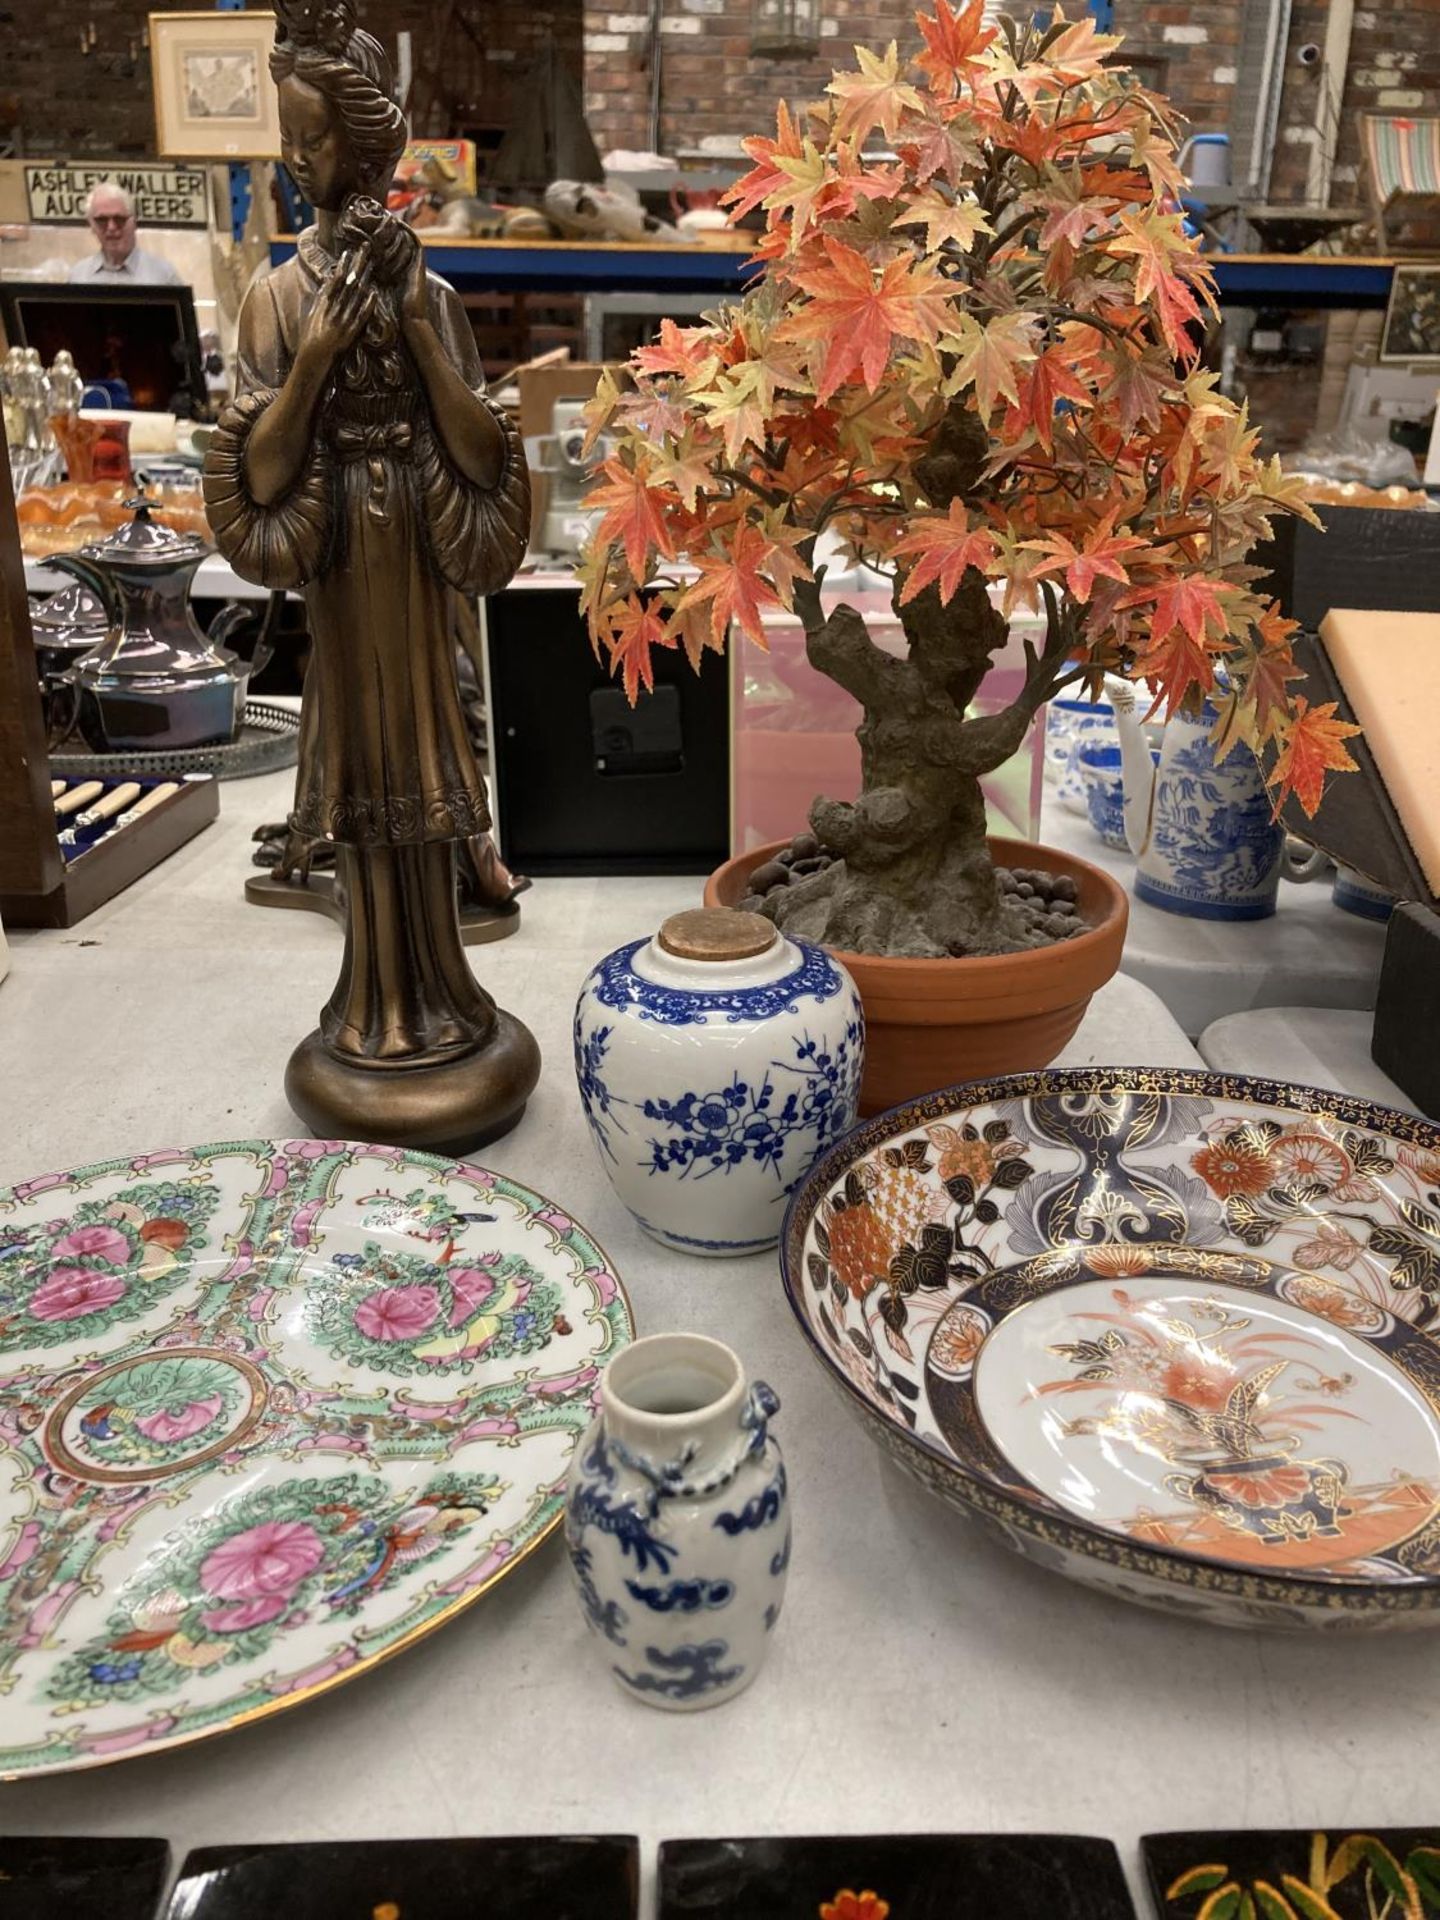 AN ORIENTAL STYLE LOT TO INCLUDE A FIGURINE, A SMALL SCREEN, BOWL, PLATE, POTS AND A MODEL OF A - Image 6 of 6